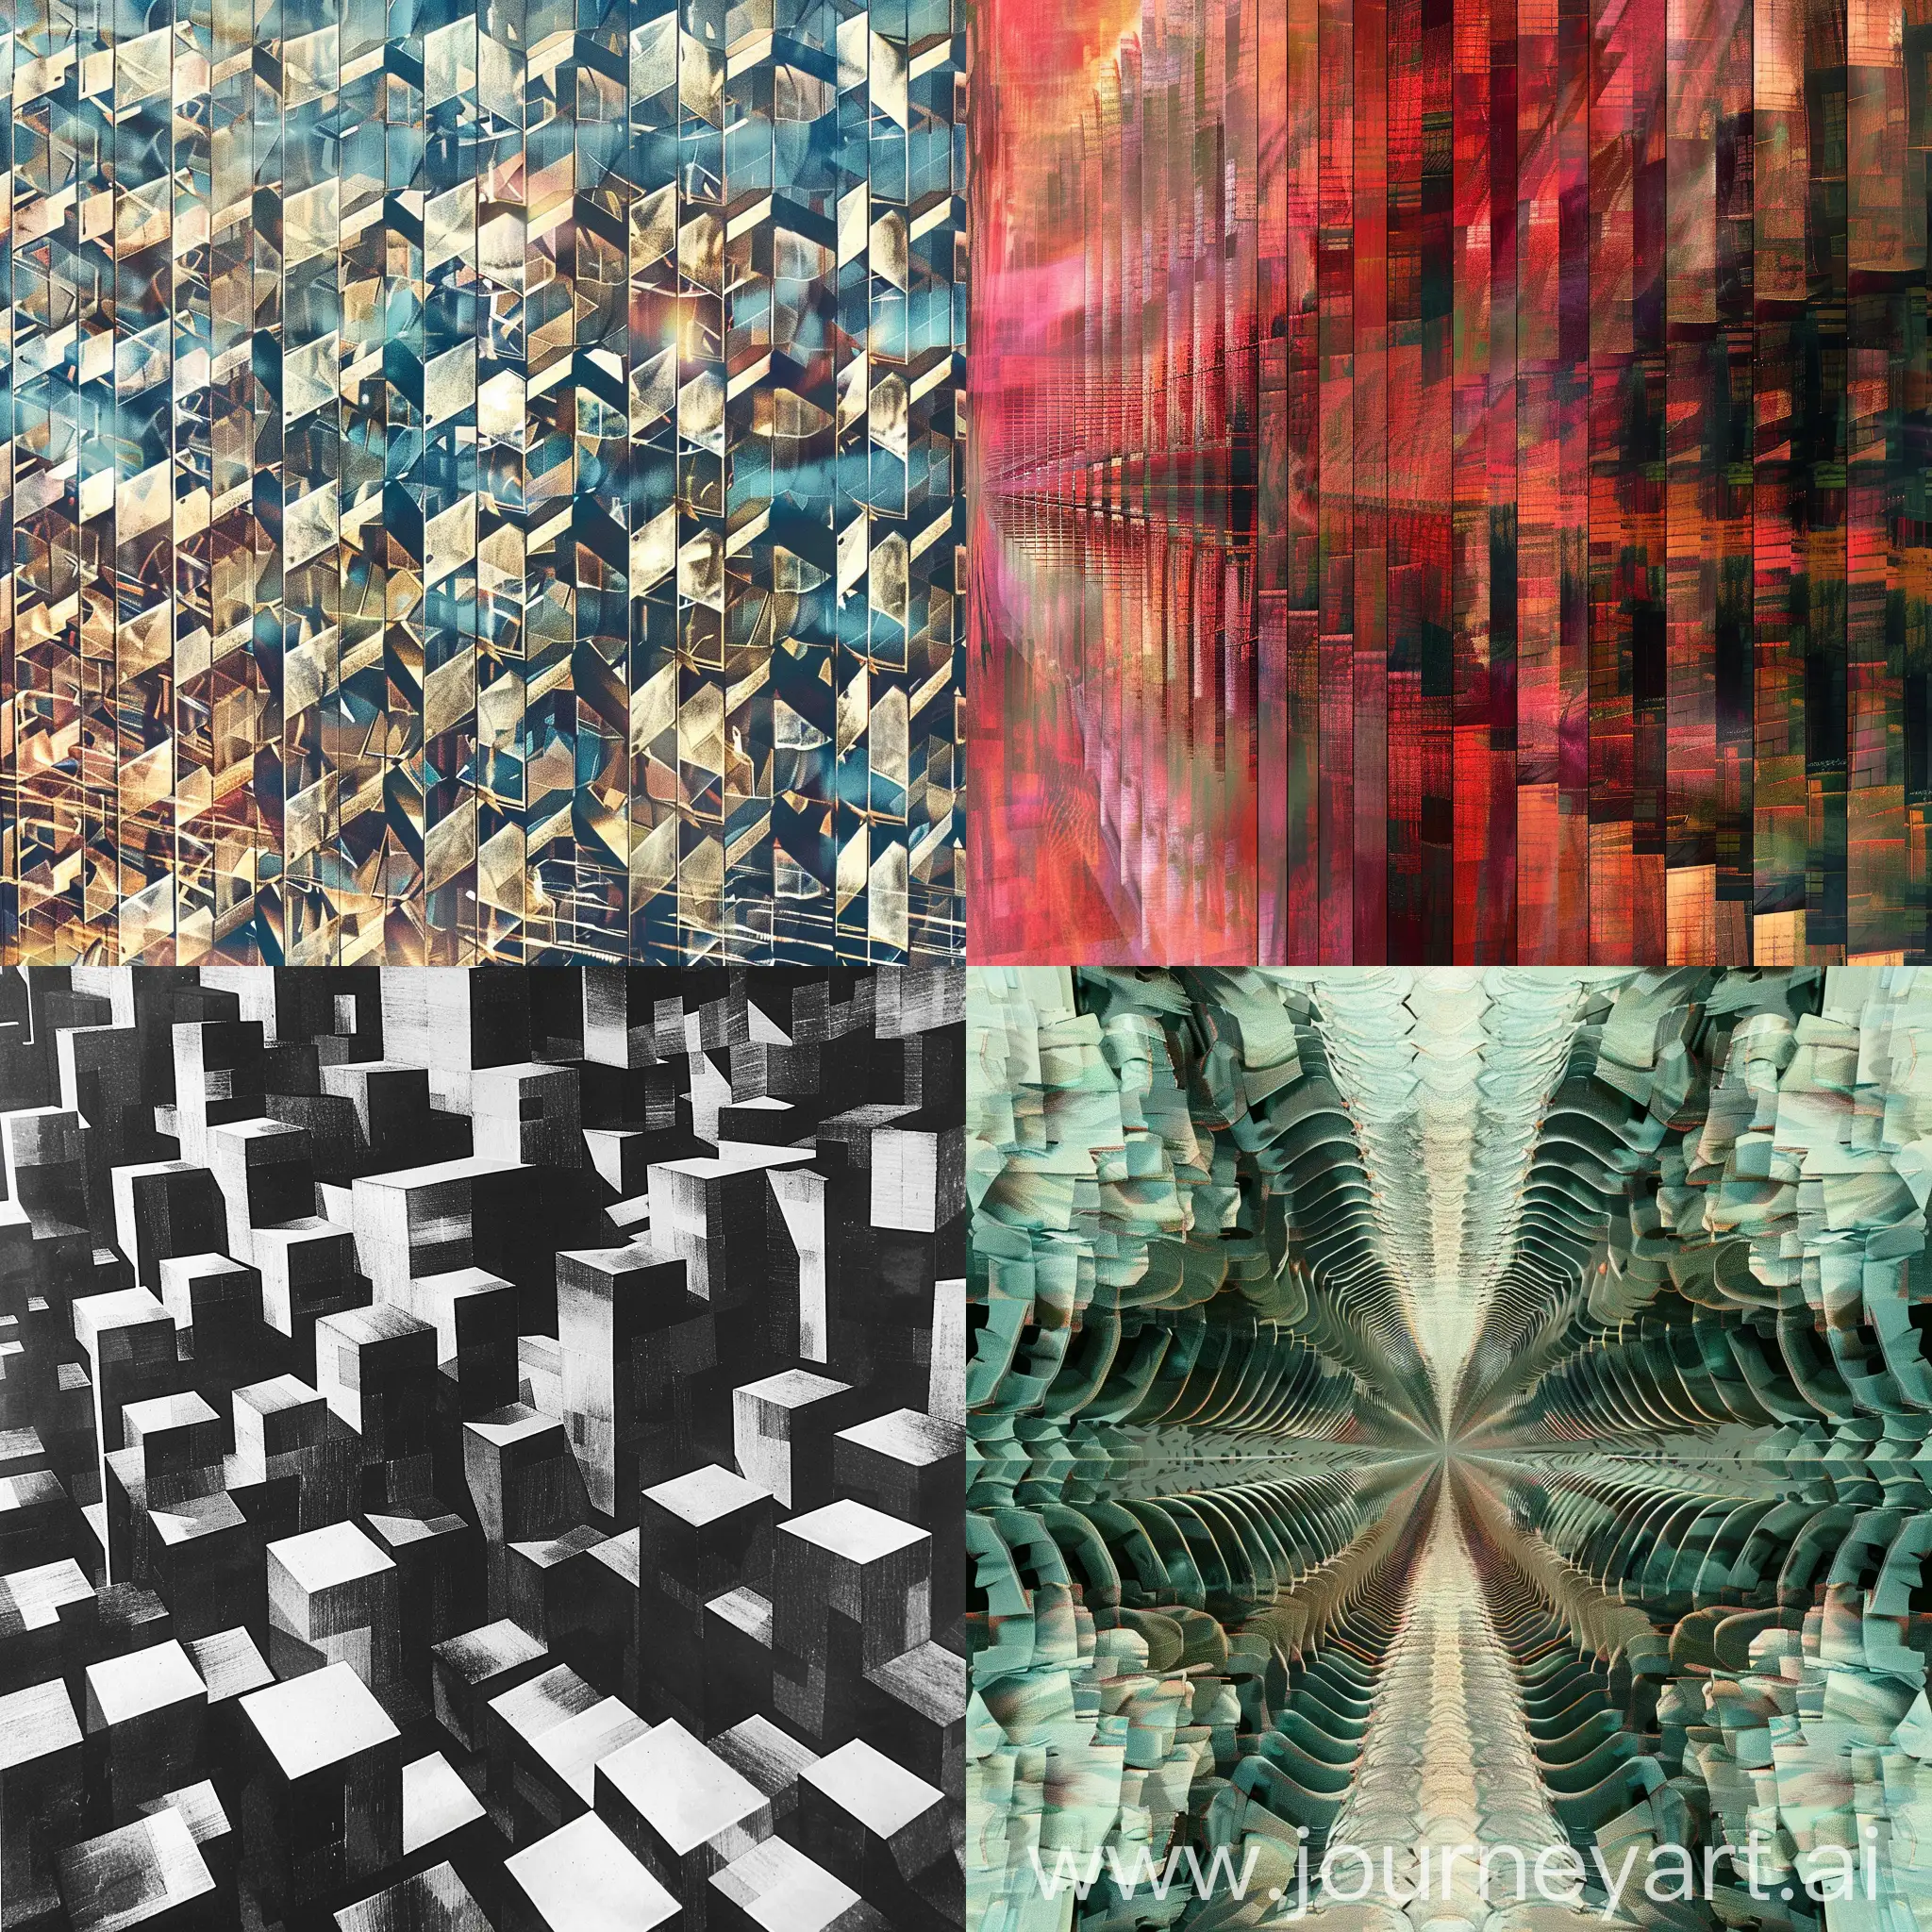 Repetitive-Patterns-in-Abstract-Art